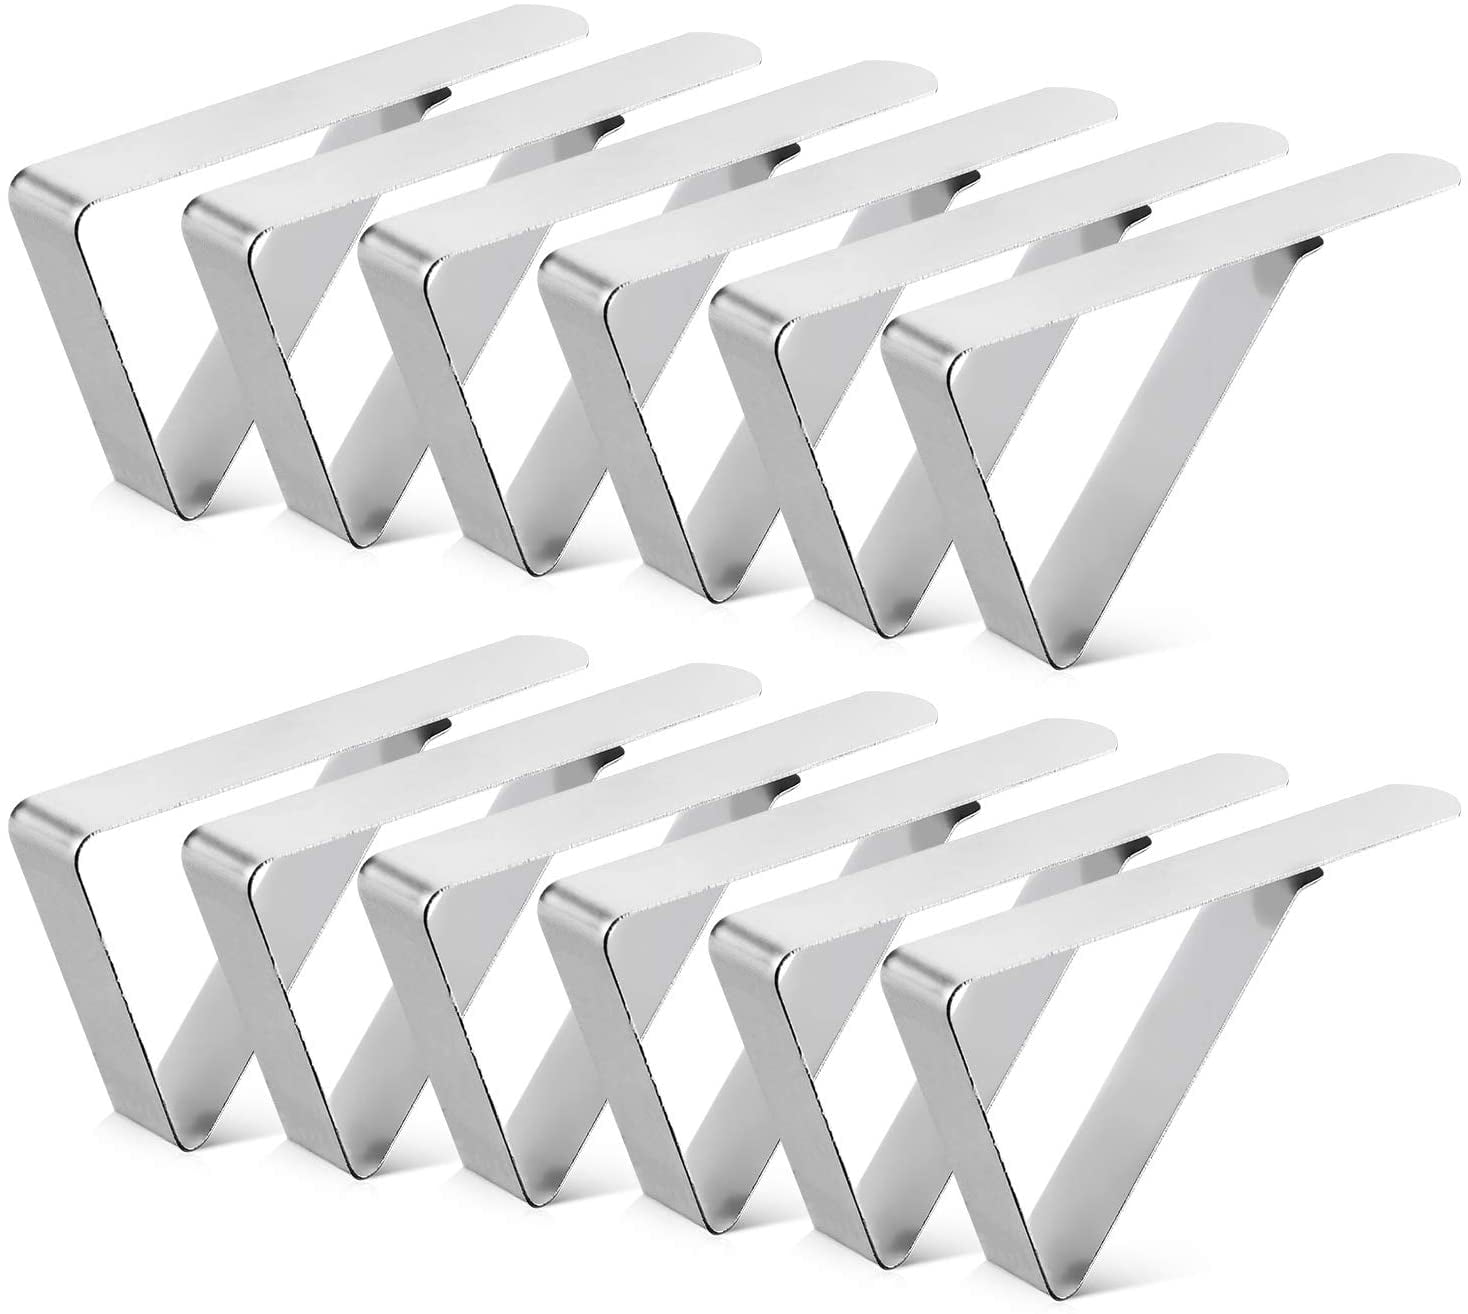 4-20 Tablecloth Clips Table Cloth Clip Table Clamps Brackets Plastic White 